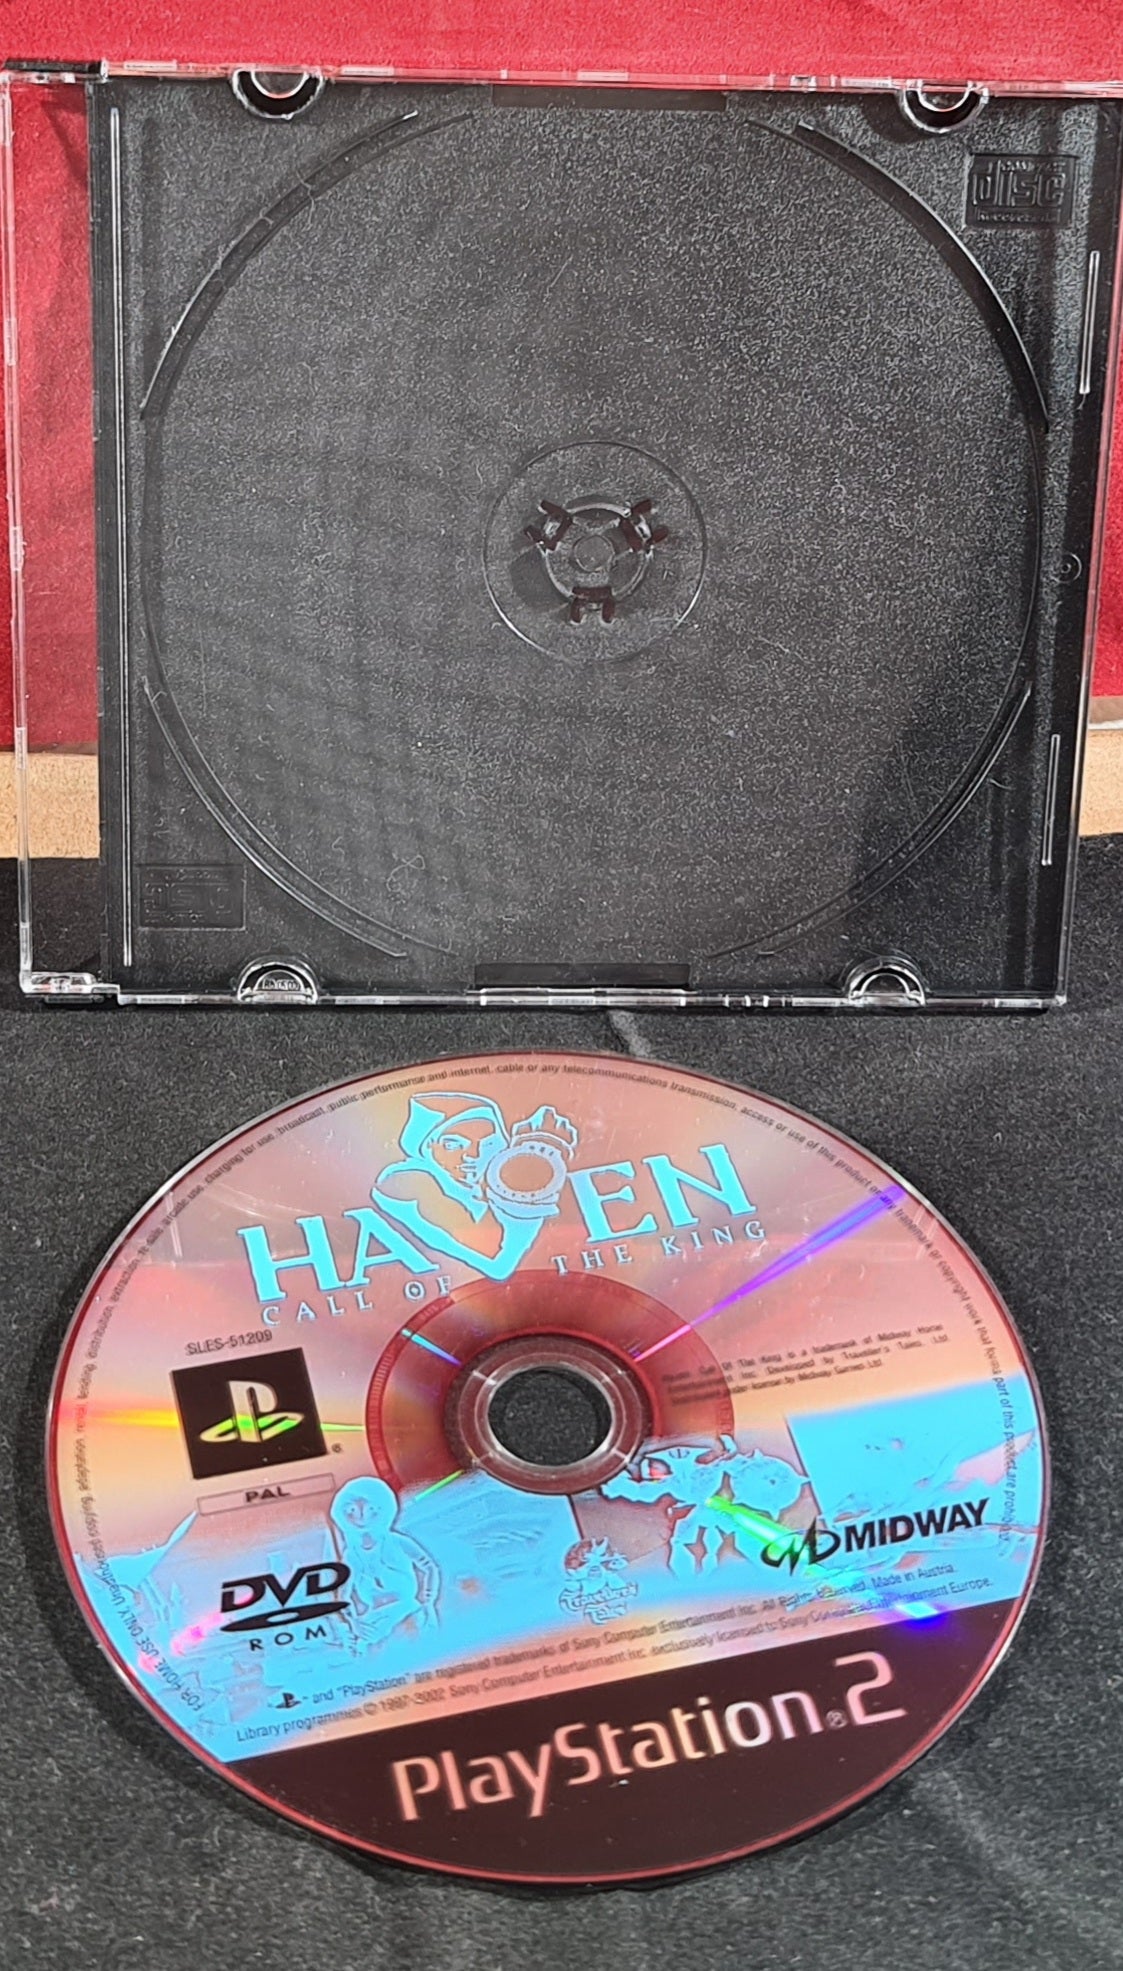 Haven Call of the King Sony Playstation 2 (PS2) Game Disc Only